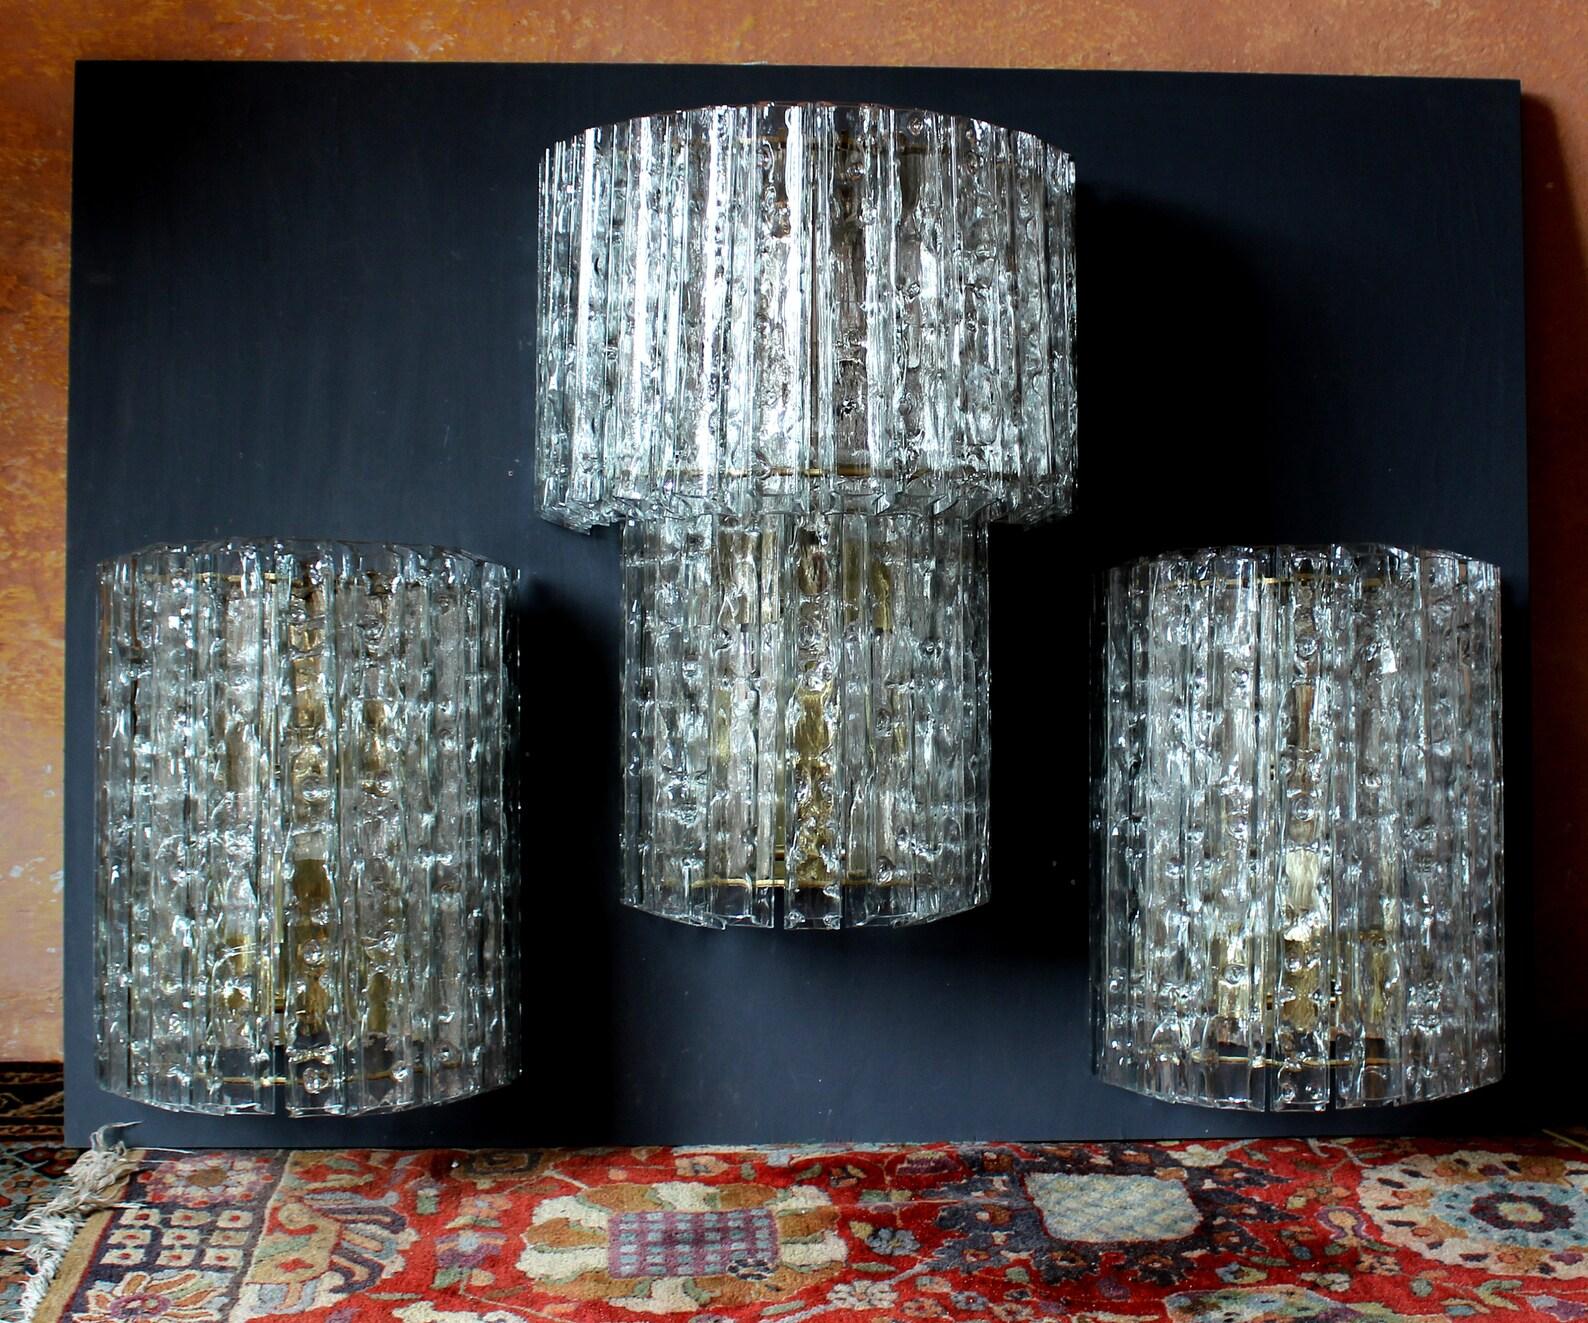 SET OF 4 FANTASTIC DORIA FÜRTH GIGANTIC CRYSTAL GLASS SCONCES

2x SIMPLE 5 LIGHTS (E27) & 10 GRAND HAND-MADE TUBES WITH SPIDER WEBS INSIDE

14 x 18 x 8 INCHES, EACH 25 lbs

2x DOUBLE 8 LIGHTS (E27) & 23 TUBES

18 x 26 x 10 INCHES, EACH 40